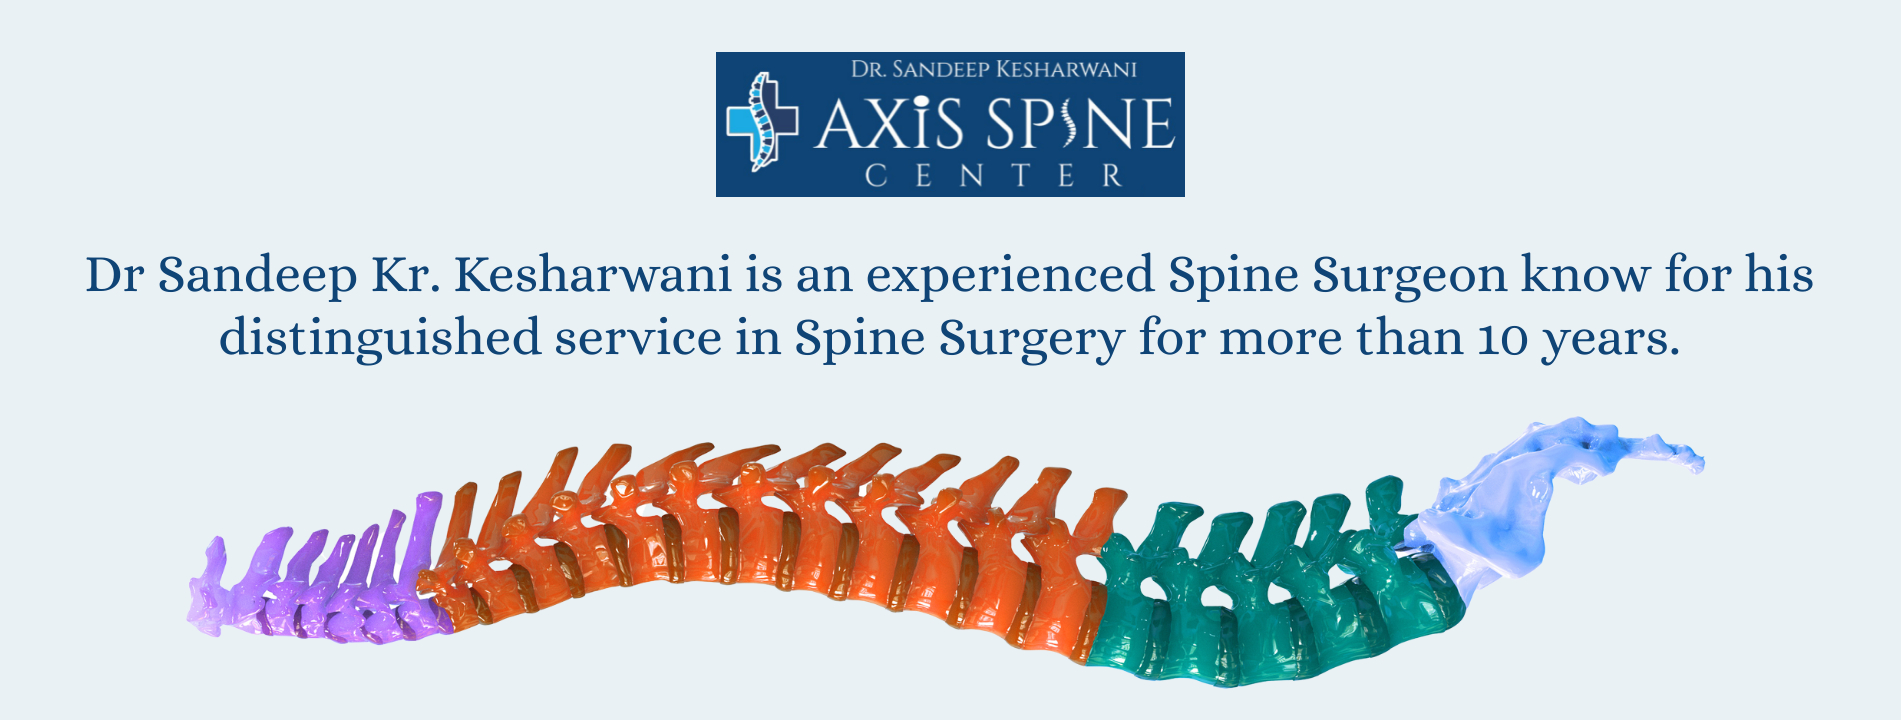 Axis Spine Center